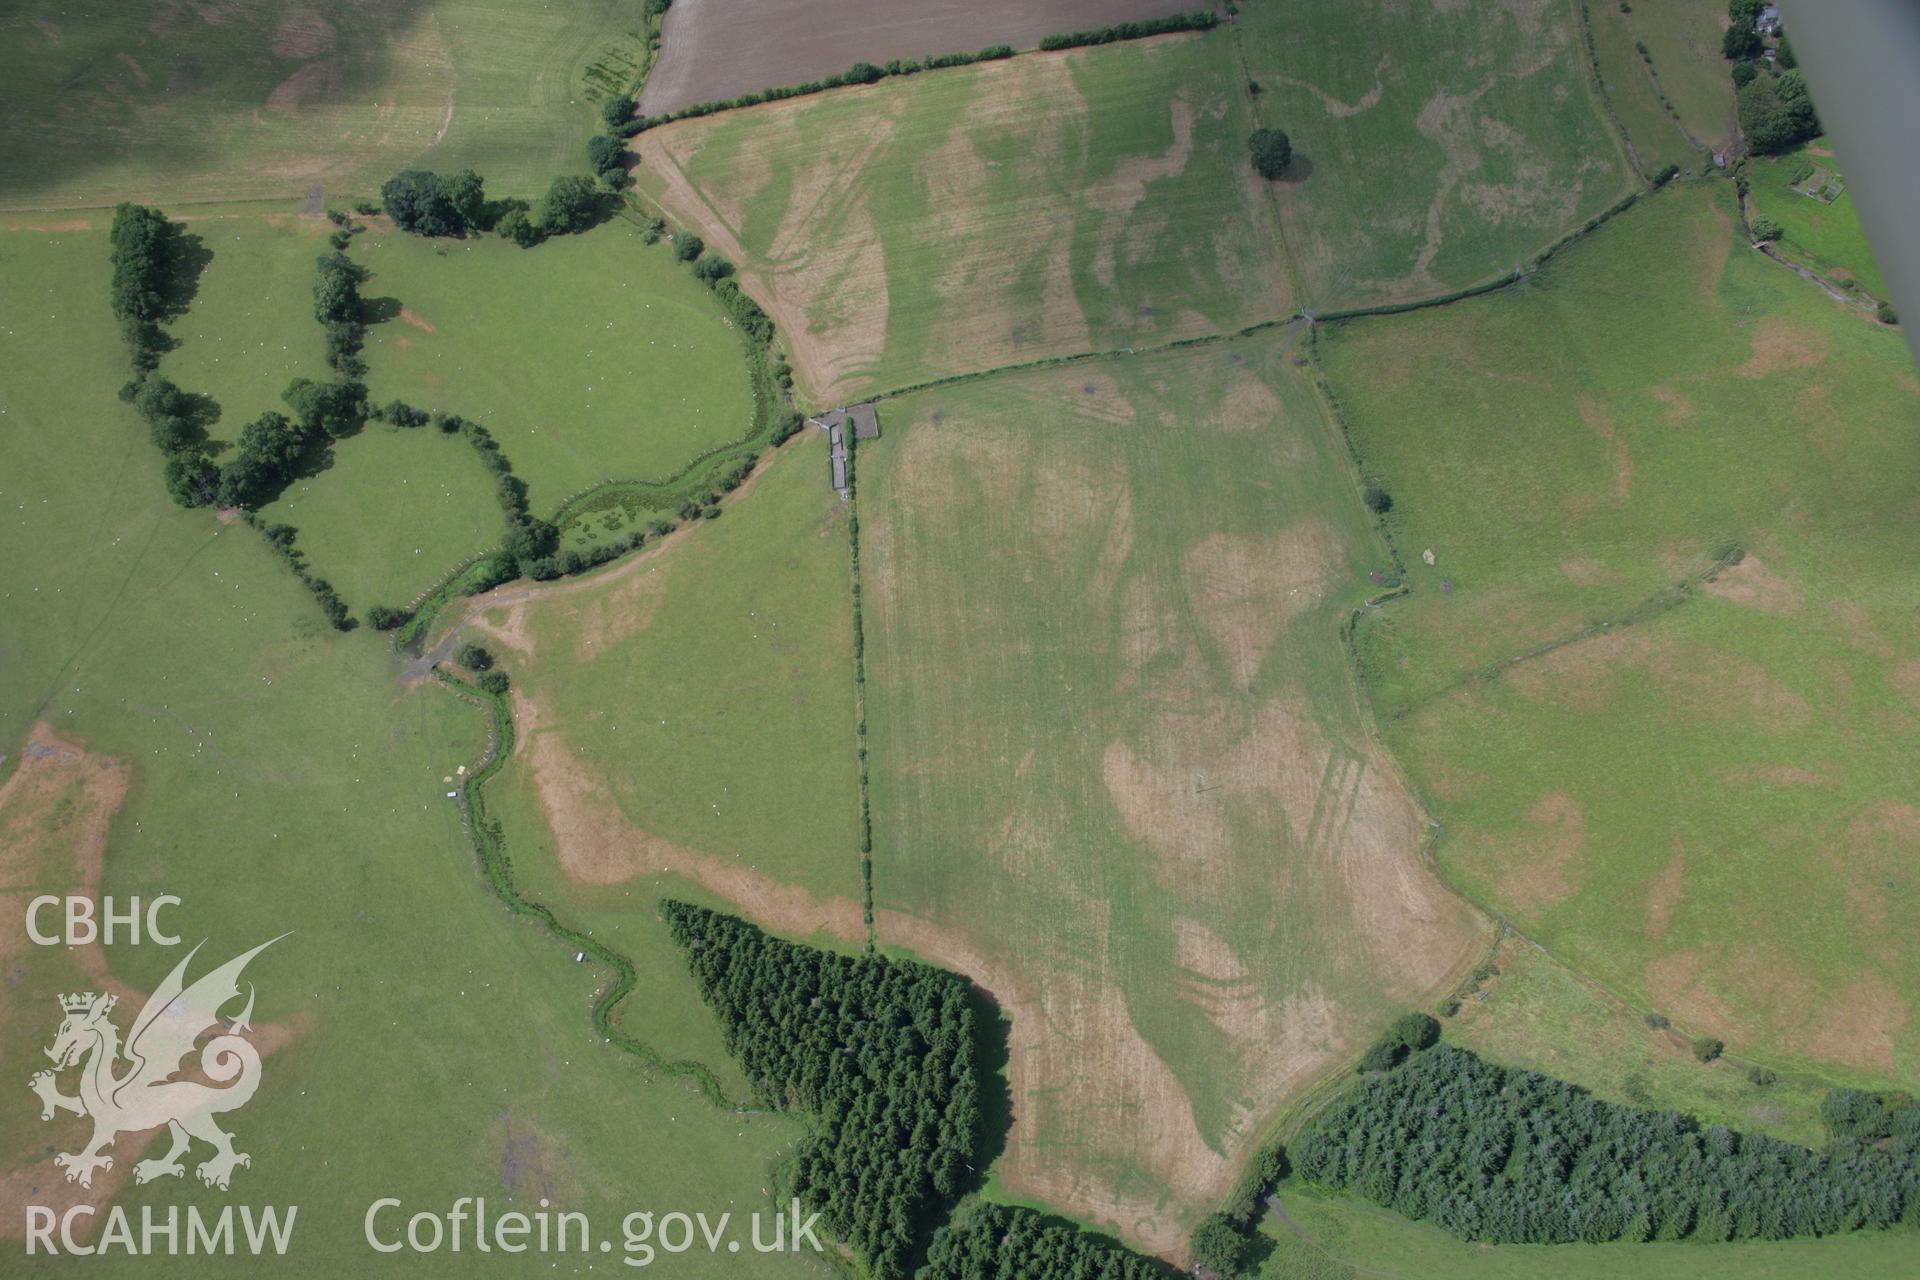 RCAHMW colour oblique aerial photograph of Llanfor Roman Military Complex visible in cropmarks, viewed from the south-east Taken on 31 July 2006 by Toby Driver.